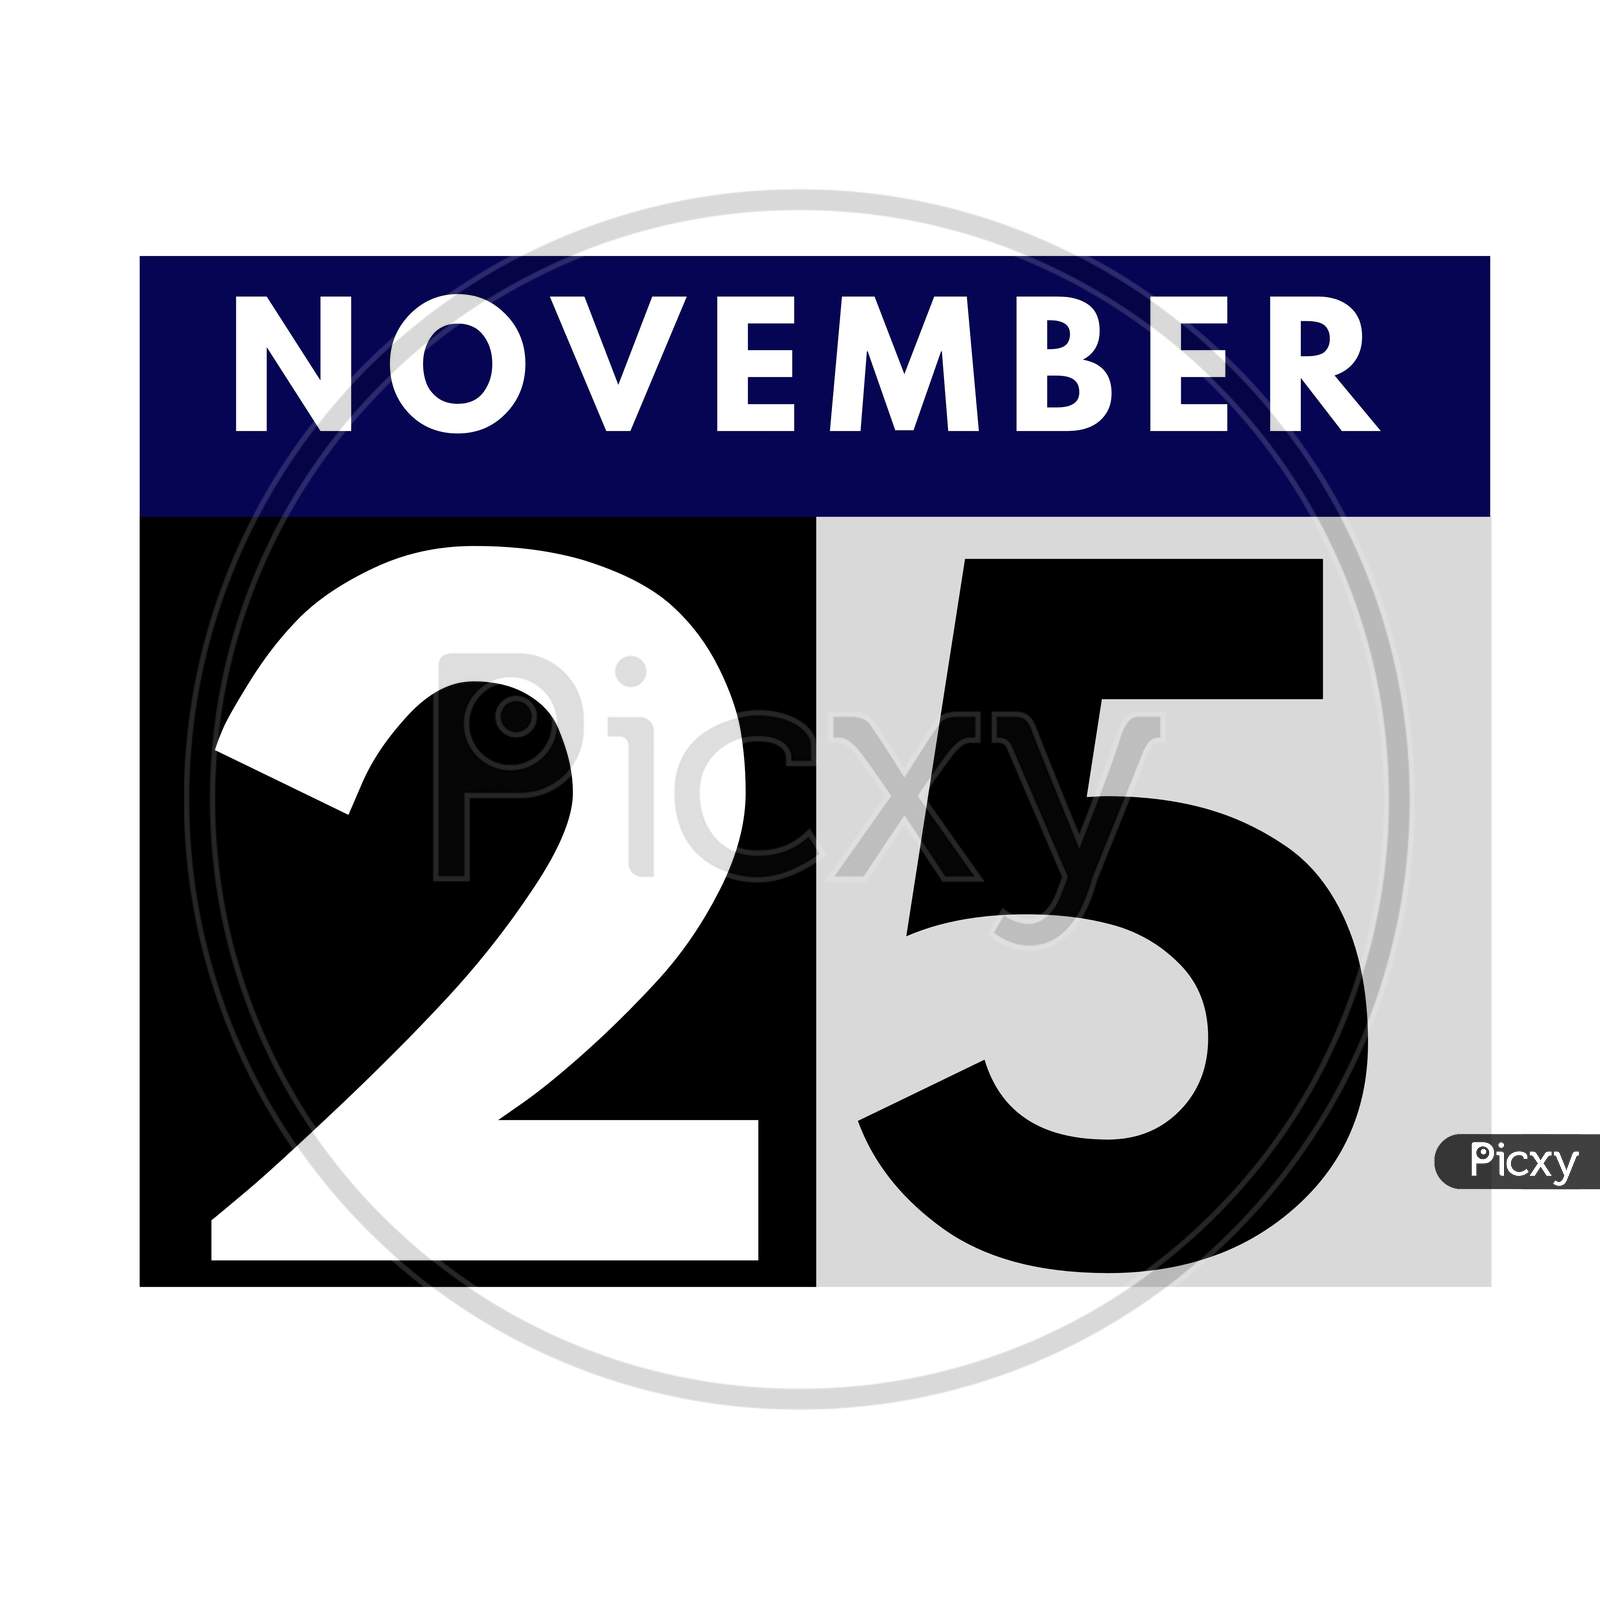 November 25 . Flat Daily Calendar Icon .Date ,Day, Month .Calendar For The Month Of November